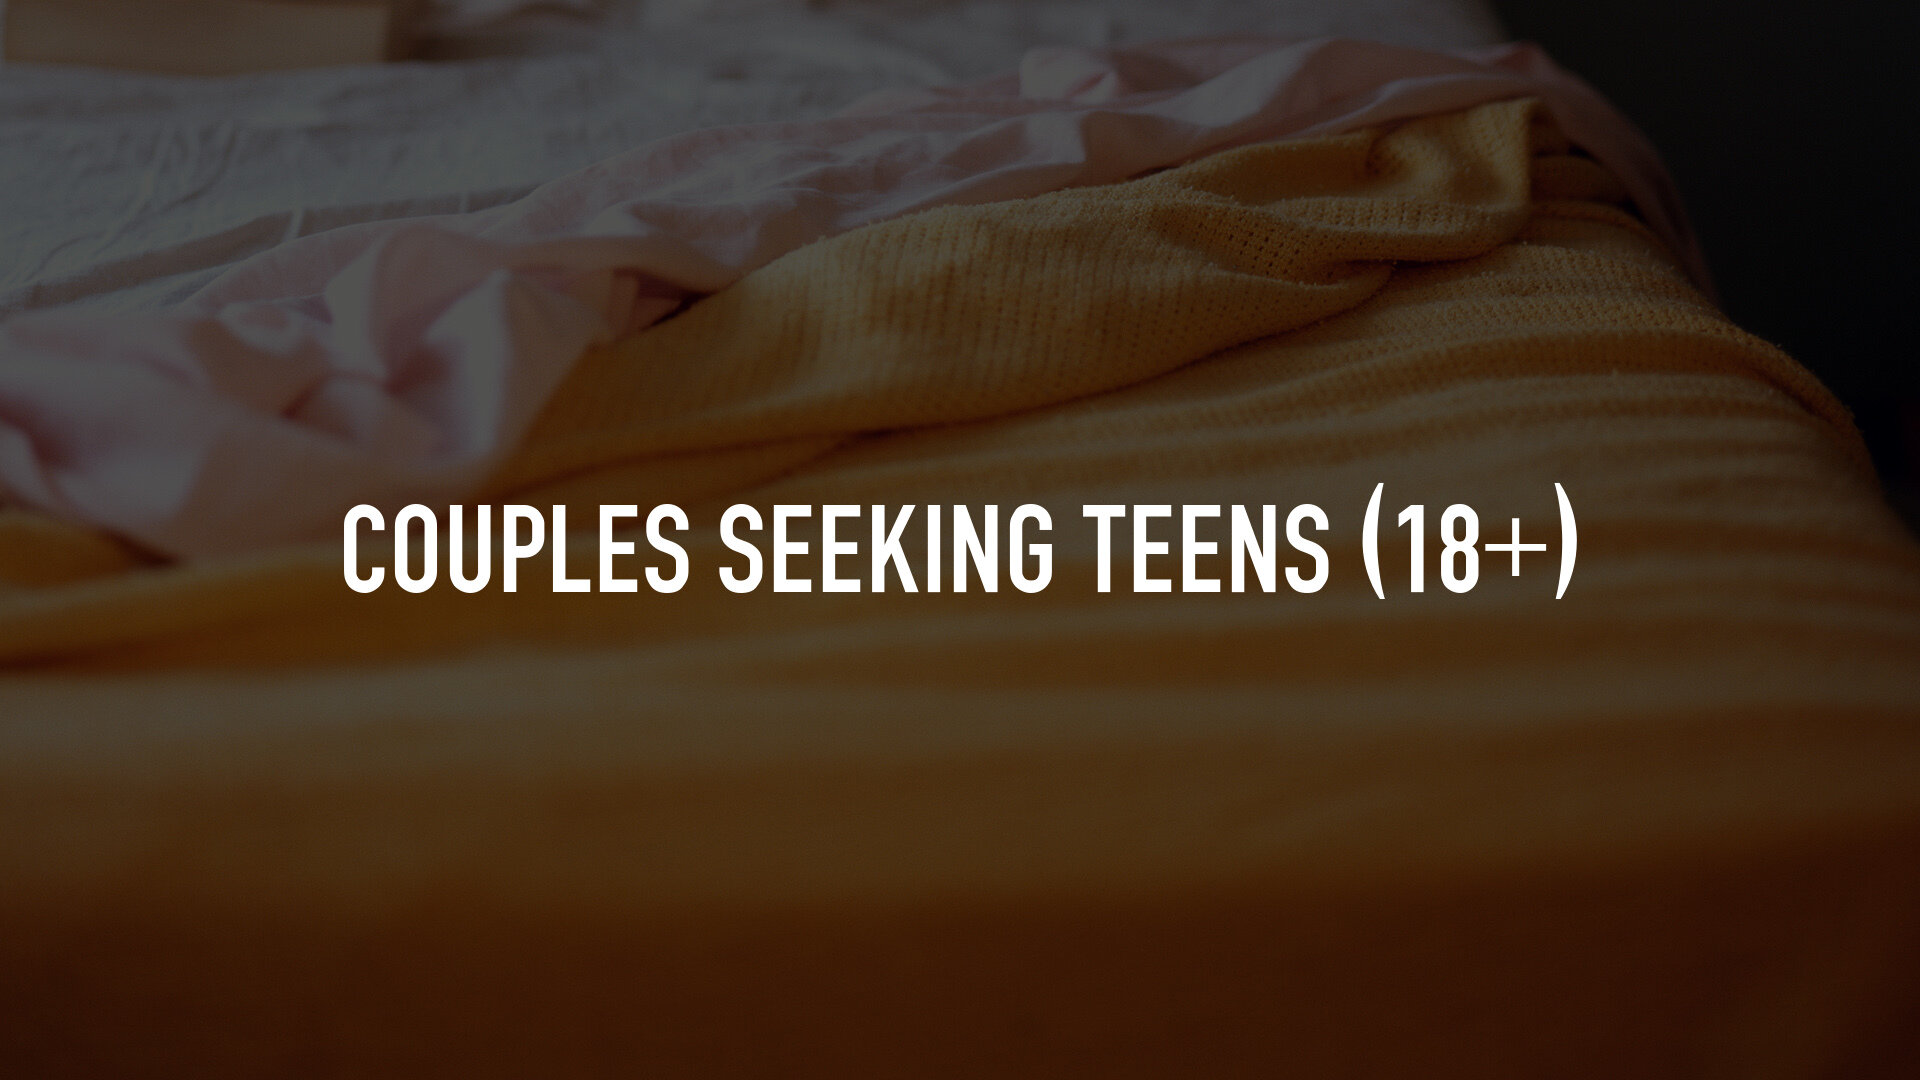 darice carr recommends couples seeking teens com pic